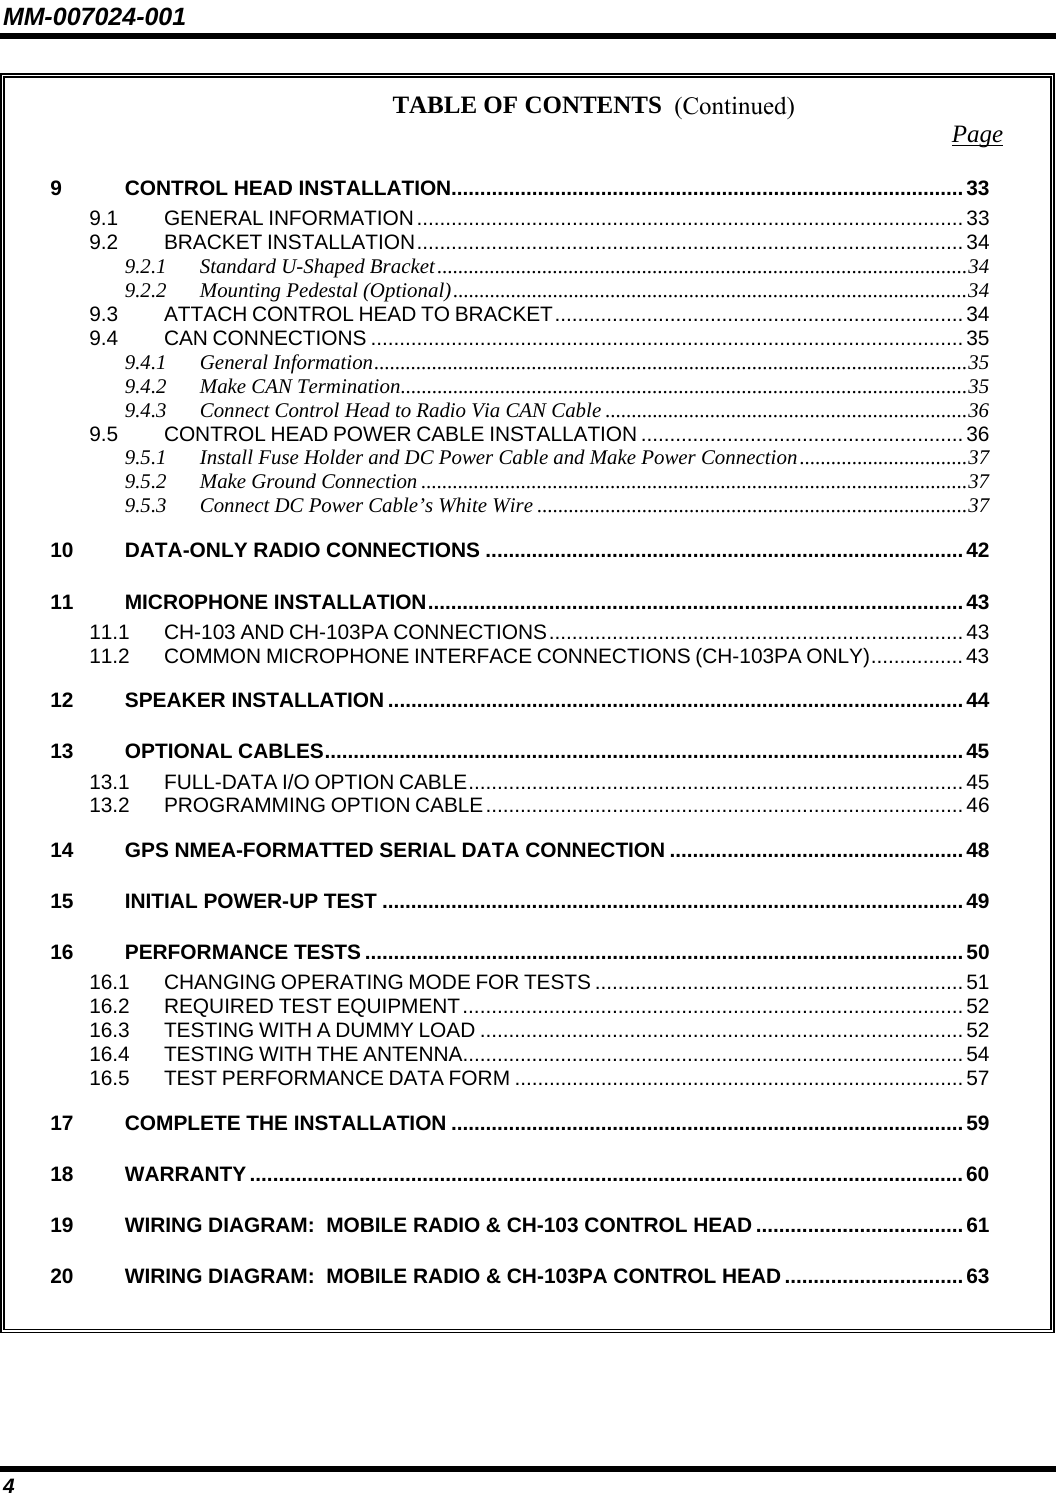 MM-007024-001 4 TABLE OF CONTENTS  Page 9 CONTROL HEAD INSTALLATION.........................................................................................33 9.1 GENERAL INFORMATION............................................................................................... 33 9.2 BRACKET INSTALLATION...............................................................................................34 9.2.1 Standard U-Shaped Bracket.....................................................................................................34 9.2.2 Mounting Pedestal (Optional)..................................................................................................34 9.3 ATTACH CONTROL HEAD TO BRACKET.......................................................................34 9.4 CAN CONNECTIONS .......................................................................................................35 9.4.1 General Information.................................................................................................................35 9.4.2 Make CAN Termination............................................................................................................35 9.4.3 Connect Control Head to Radio Via CAN Cable .....................................................................36 9.5 CONTROL HEAD POWER CABLE INSTALLATION ........................................................36 9.5.1 Install Fuse Holder and DC Power Cable and Make Power Connection................................37 9.5.2 Make Ground Connection ........................................................................................................37 9.5.3 Connect DC Power Cable’s White Wire ..................................................................................37 10 DATA-ONLY RADIO CONNECTIONS ...................................................................................42 11 MICROPHONE INSTALLATION.............................................................................................43 11.1 CH-103 AND CH-103PA CONNECTIONS........................................................................43 11.2 COMMON MICROPHONE INTERFACE CONNECTIONS (CH-103PA ONLY)................43 12 SPEAKER INSTALLATION ....................................................................................................44 13 OPTIONAL CABLES............................................................................................................... 45 13.1 FULL-DATA I/O OPTION CABLE...................................................................................... 45 13.2 PROGRAMMING OPTION CABLE................................................................................... 46 14 GPS NMEA-FORMATTED SERIAL DATA CONNECTION ...................................................48 15 INITIAL POWER-UP TEST .....................................................................................................49 16 PERFORMANCE TESTS ........................................................................................................50 16.1 CHANGING OPERATING MODE FOR TESTS ................................................................51 16.2 REQUIRED TEST EQUIPMENT.......................................................................................52 16.3 TESTING WITH A DUMMY LOAD ....................................................................................52 16.4 TESTING WITH THE ANTENNA.......................................................................................54 16.5 TEST PERFORMANCE DATA FORM ..............................................................................57 17 COMPLETE THE INSTALLATION .........................................................................................59 18 WARRANTY ............................................................................................................................60 19 WIRING DIAGRAM:  MOBILE RADIO &amp; CH-103 CONTROL HEAD ....................................61 20 WIRING DIAGRAM:  MOBILE RADIO &amp; CH-103PA CONTROL HEAD ...............................63   (Continued) 